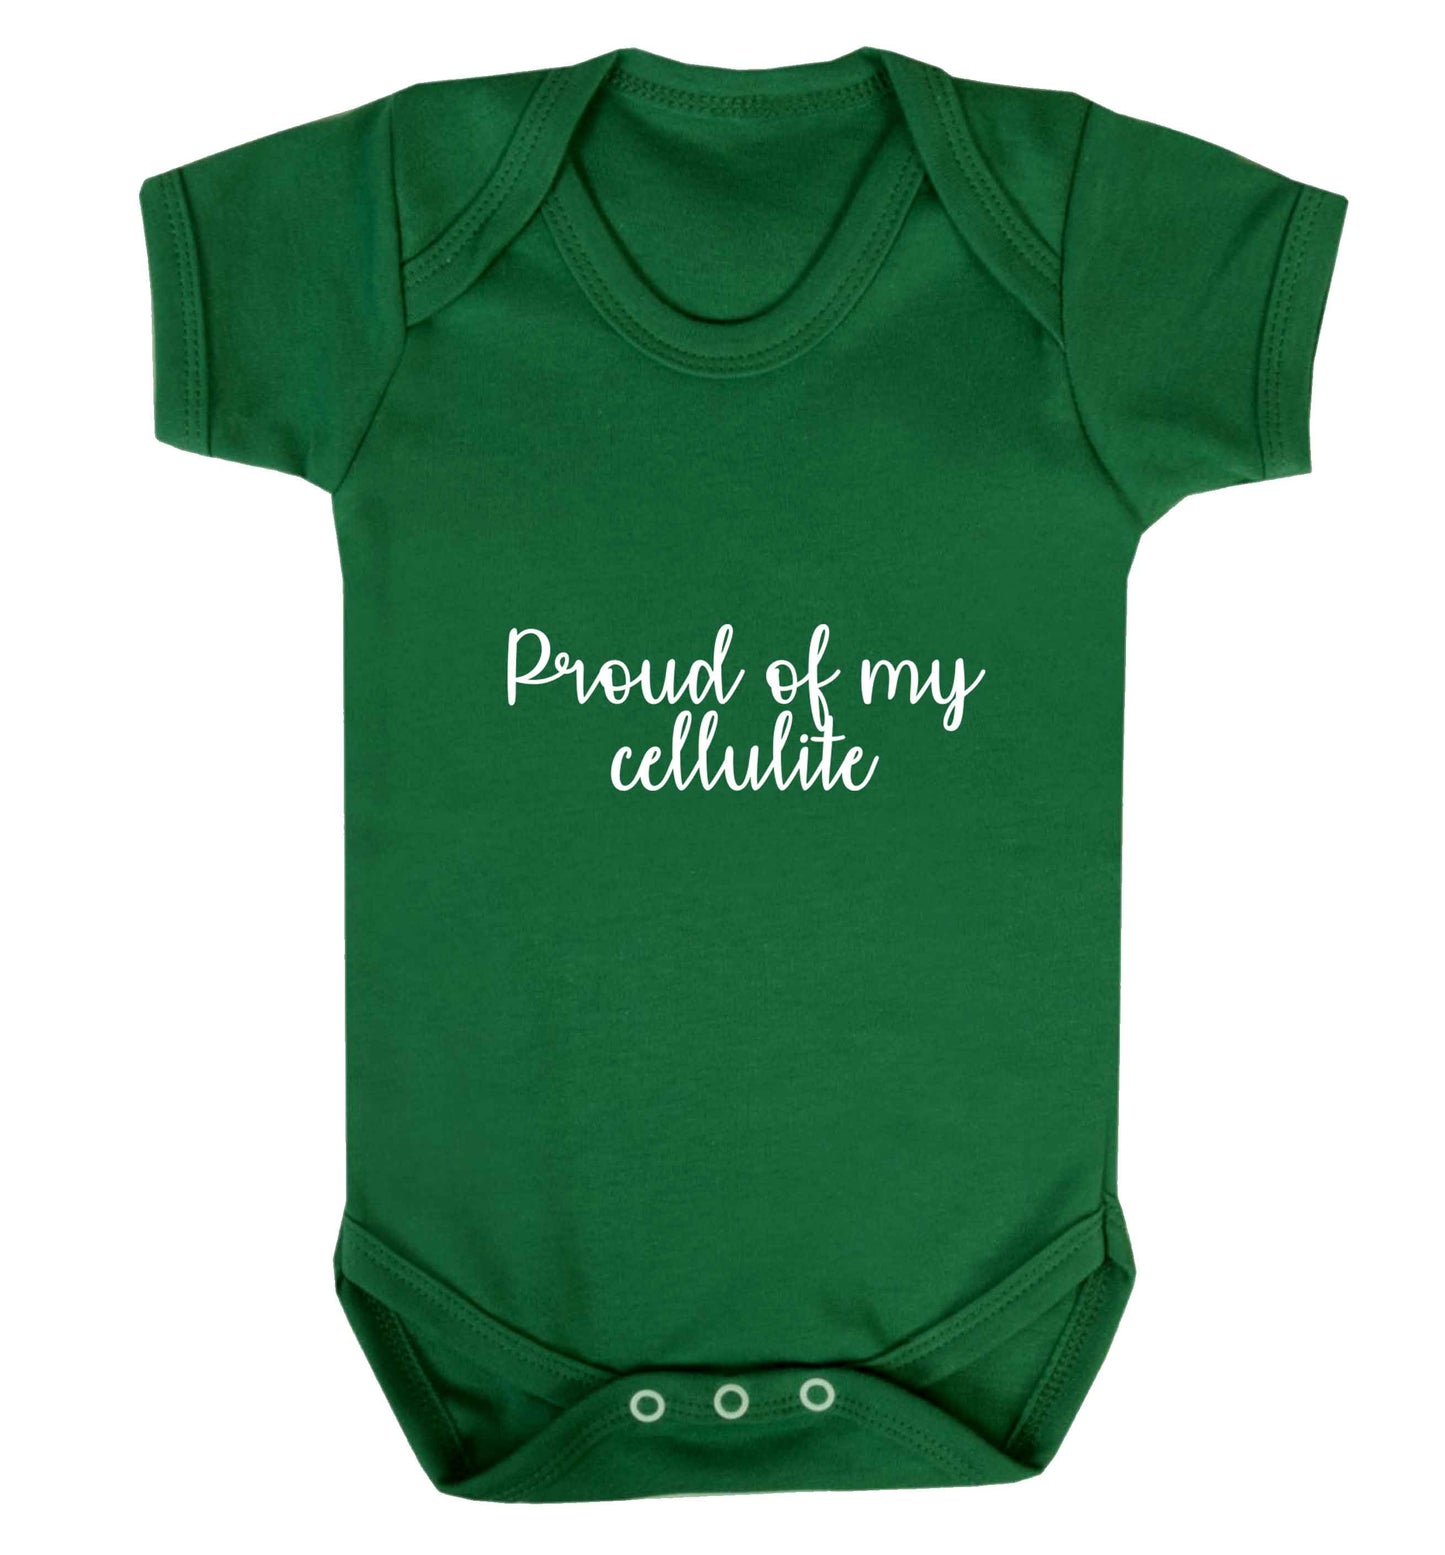 Proud of my cellulite baby vest green 18-24 months